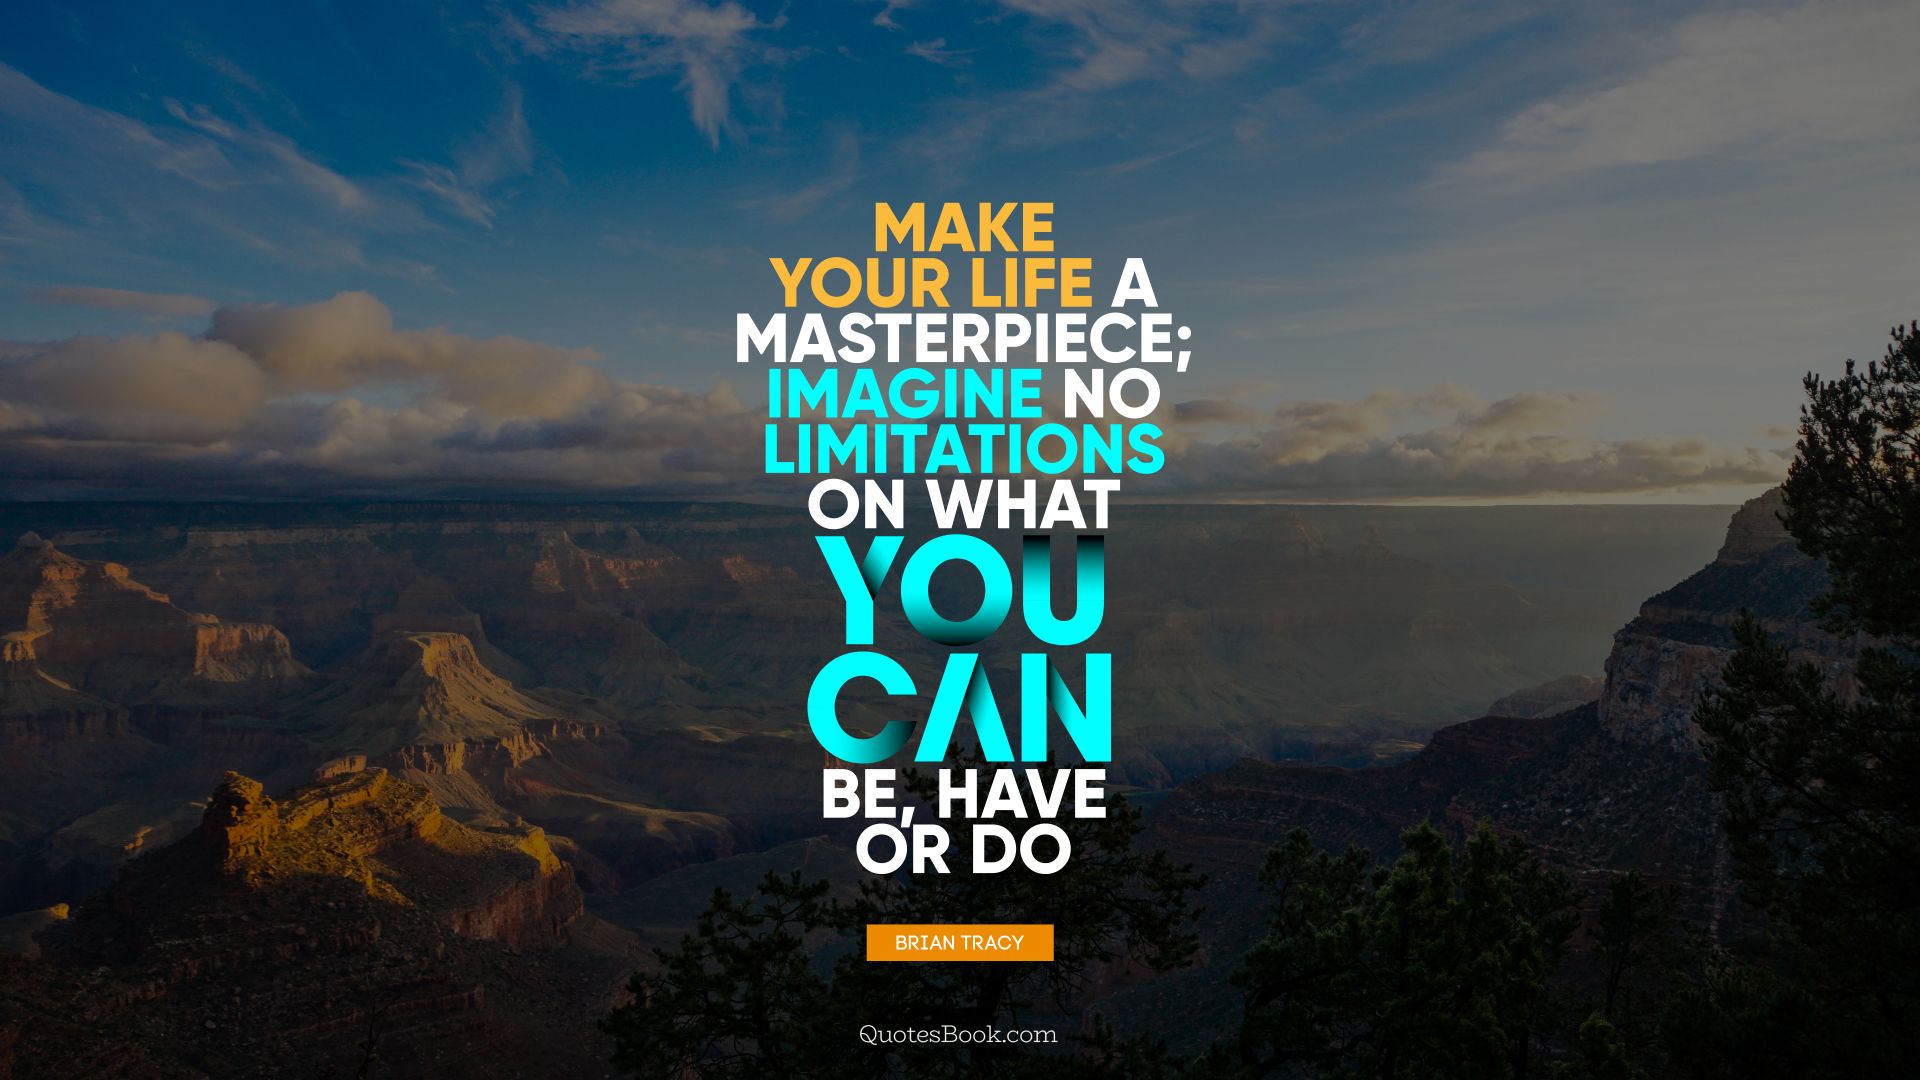 Make your life a masterpiece; imagine no limitations on what you can be, have or do. - Quote by Brian Tracy